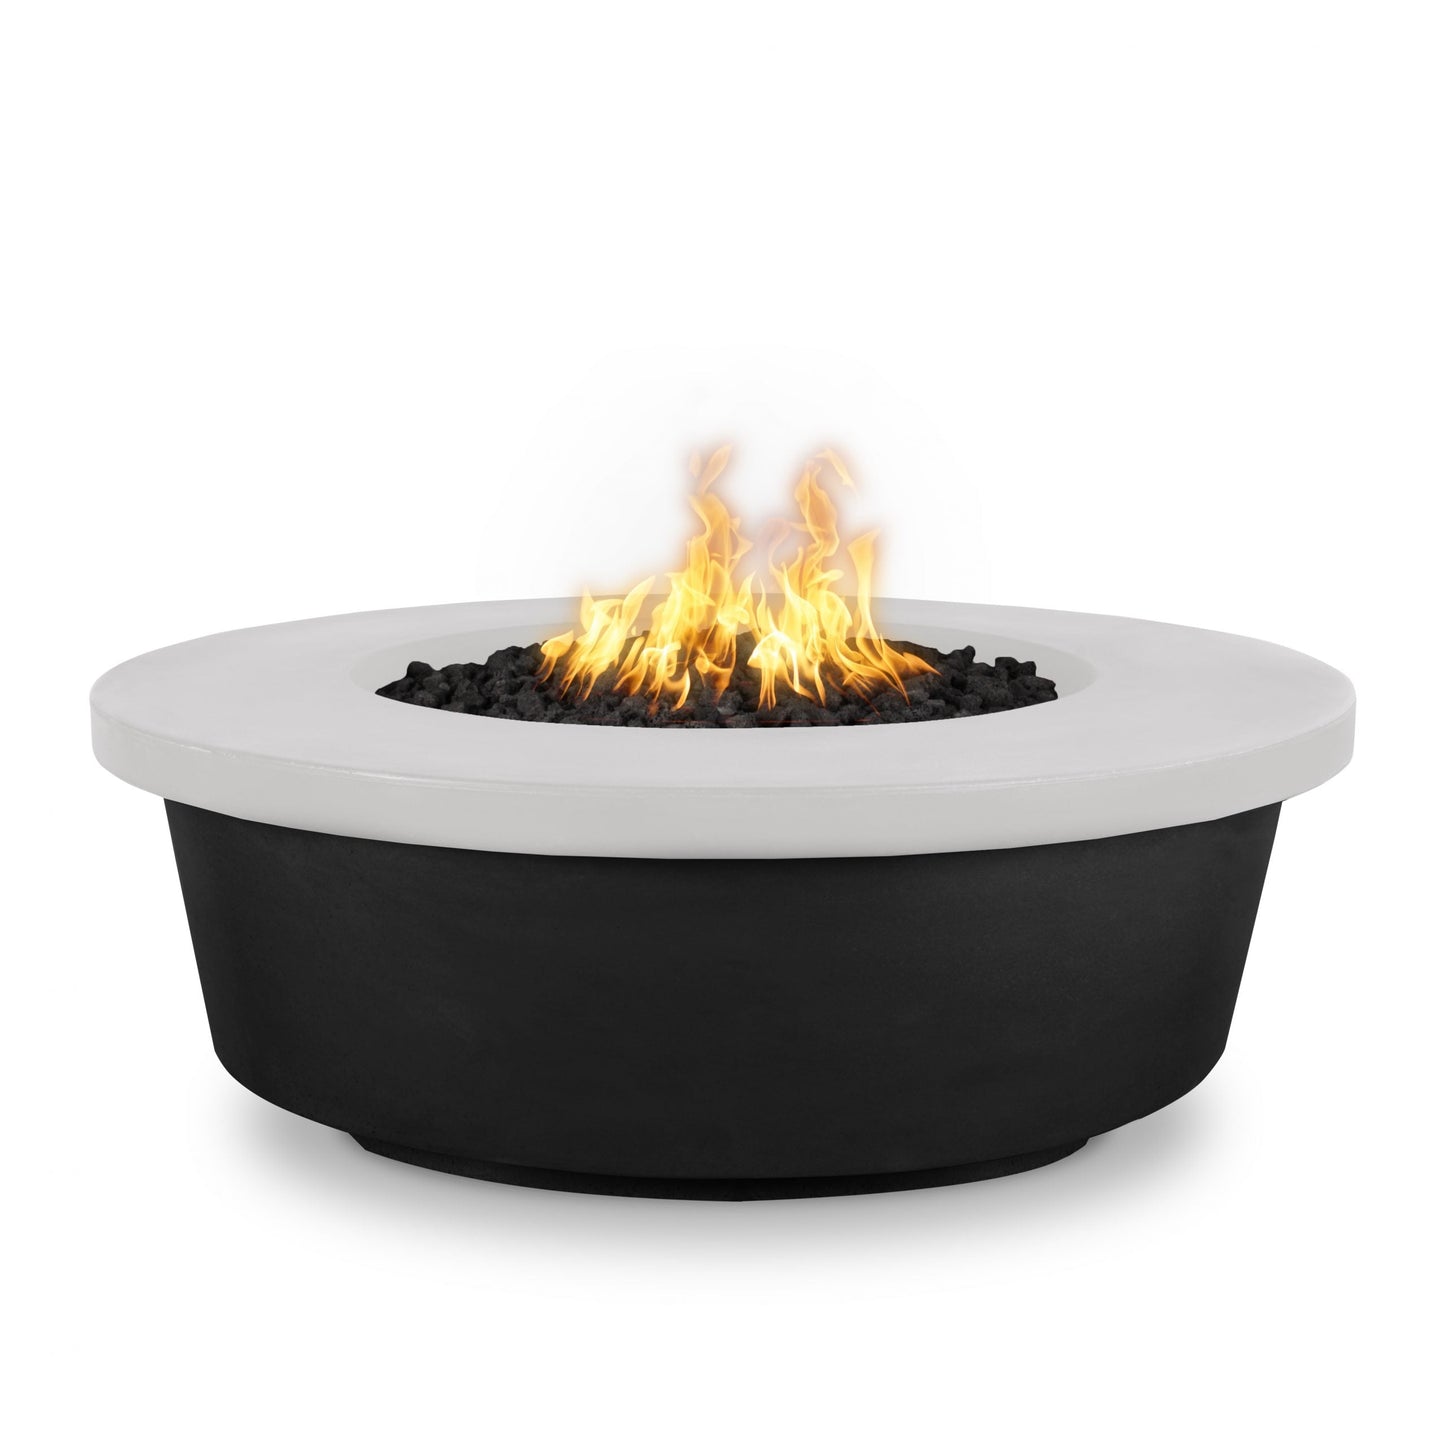 The Outdoor Plus Round Tempe 48" Black & White Powder Coated Natural Gas Fire Pit with Match Lit Ignition